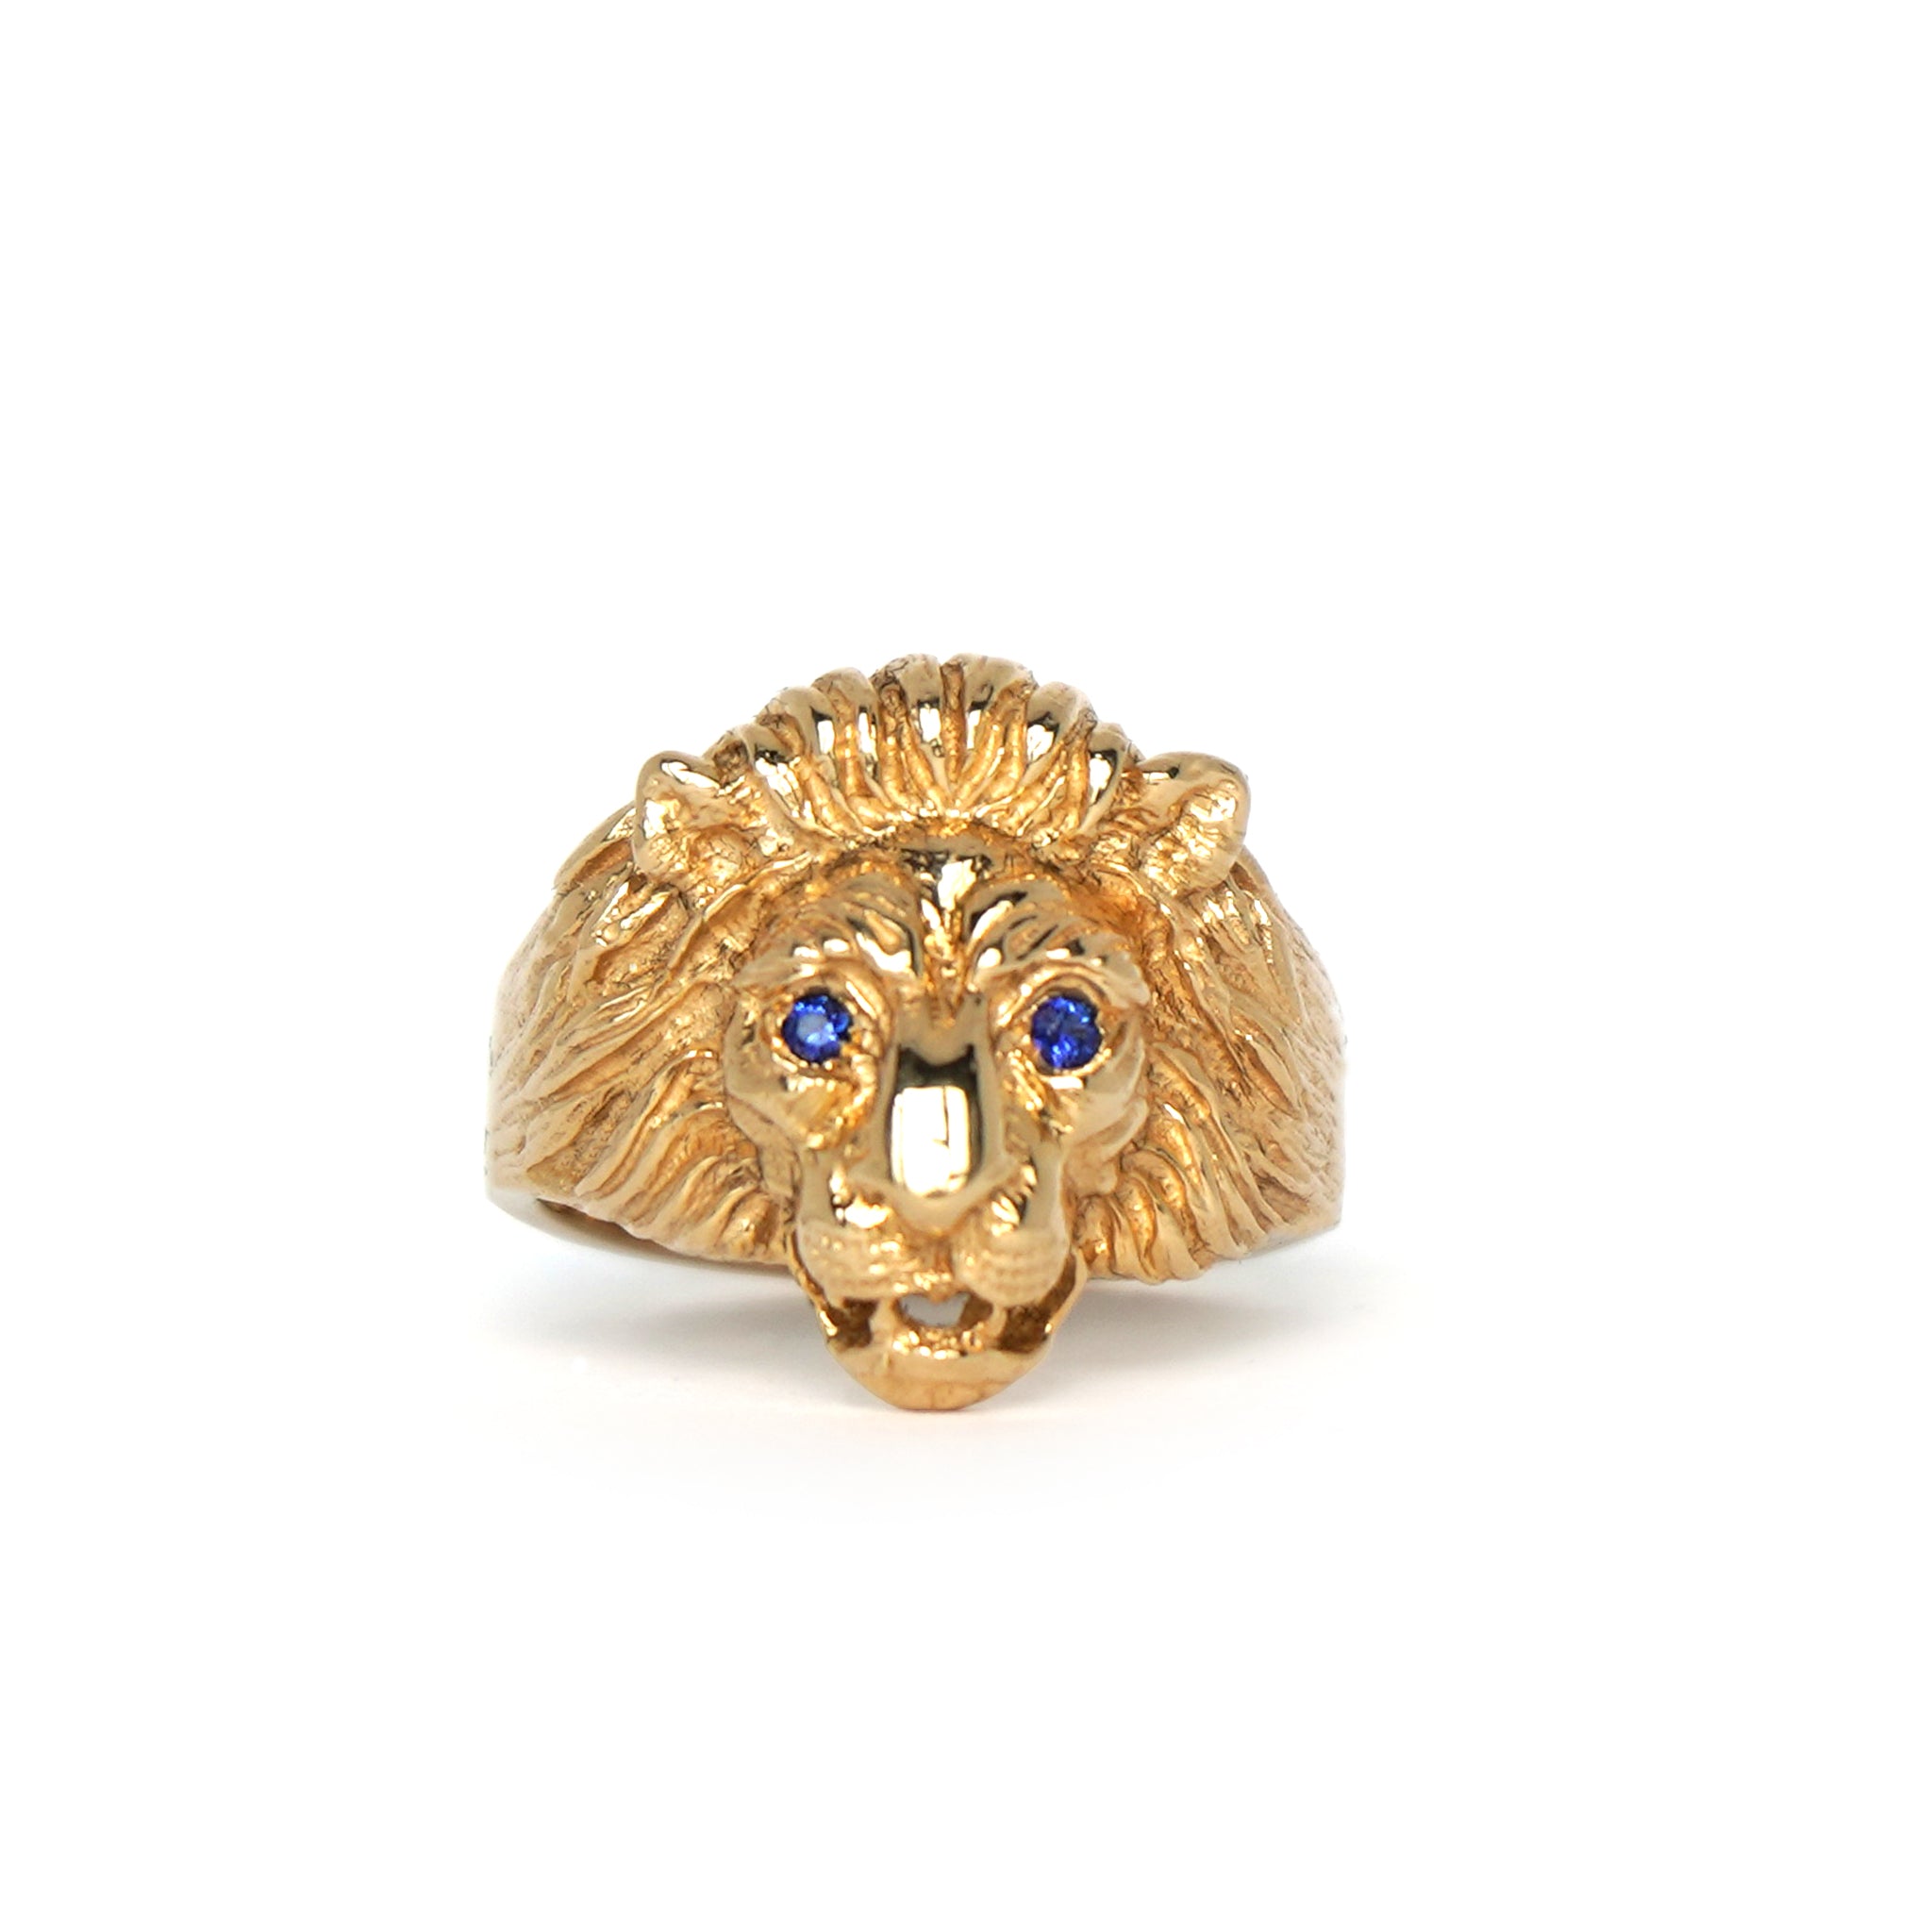 A close-up of a Lico Jewelry's Cuor di Leone ring with genuine blue sapphire eyes set in 14k yellow gold, based out of Montreal.